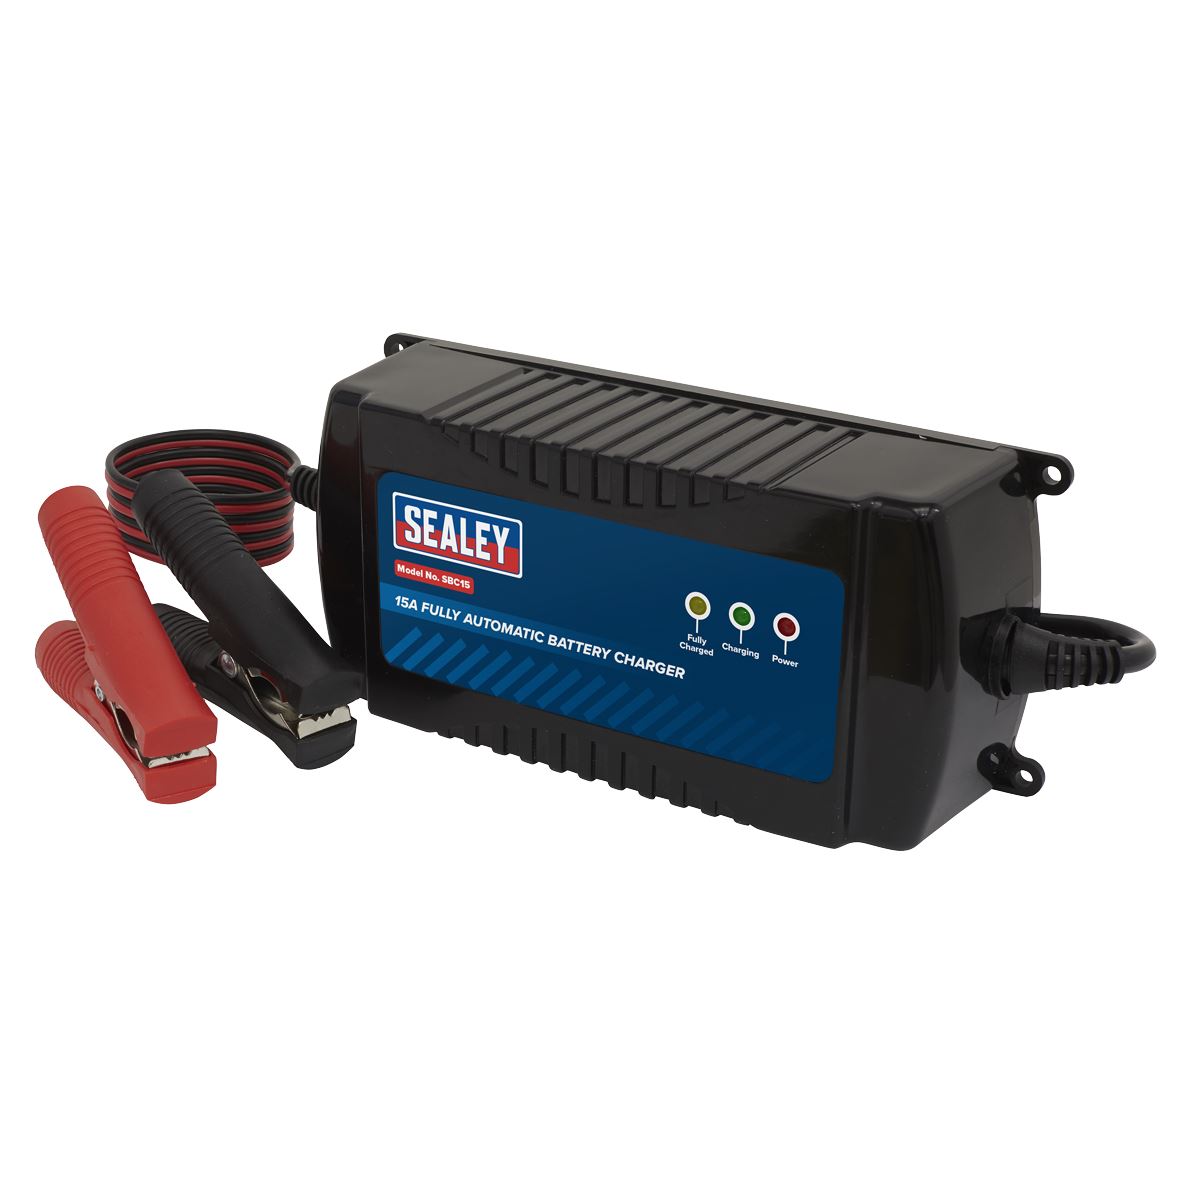 Sealey Battery Maintainer Charger 12V 15A Fully Automatic